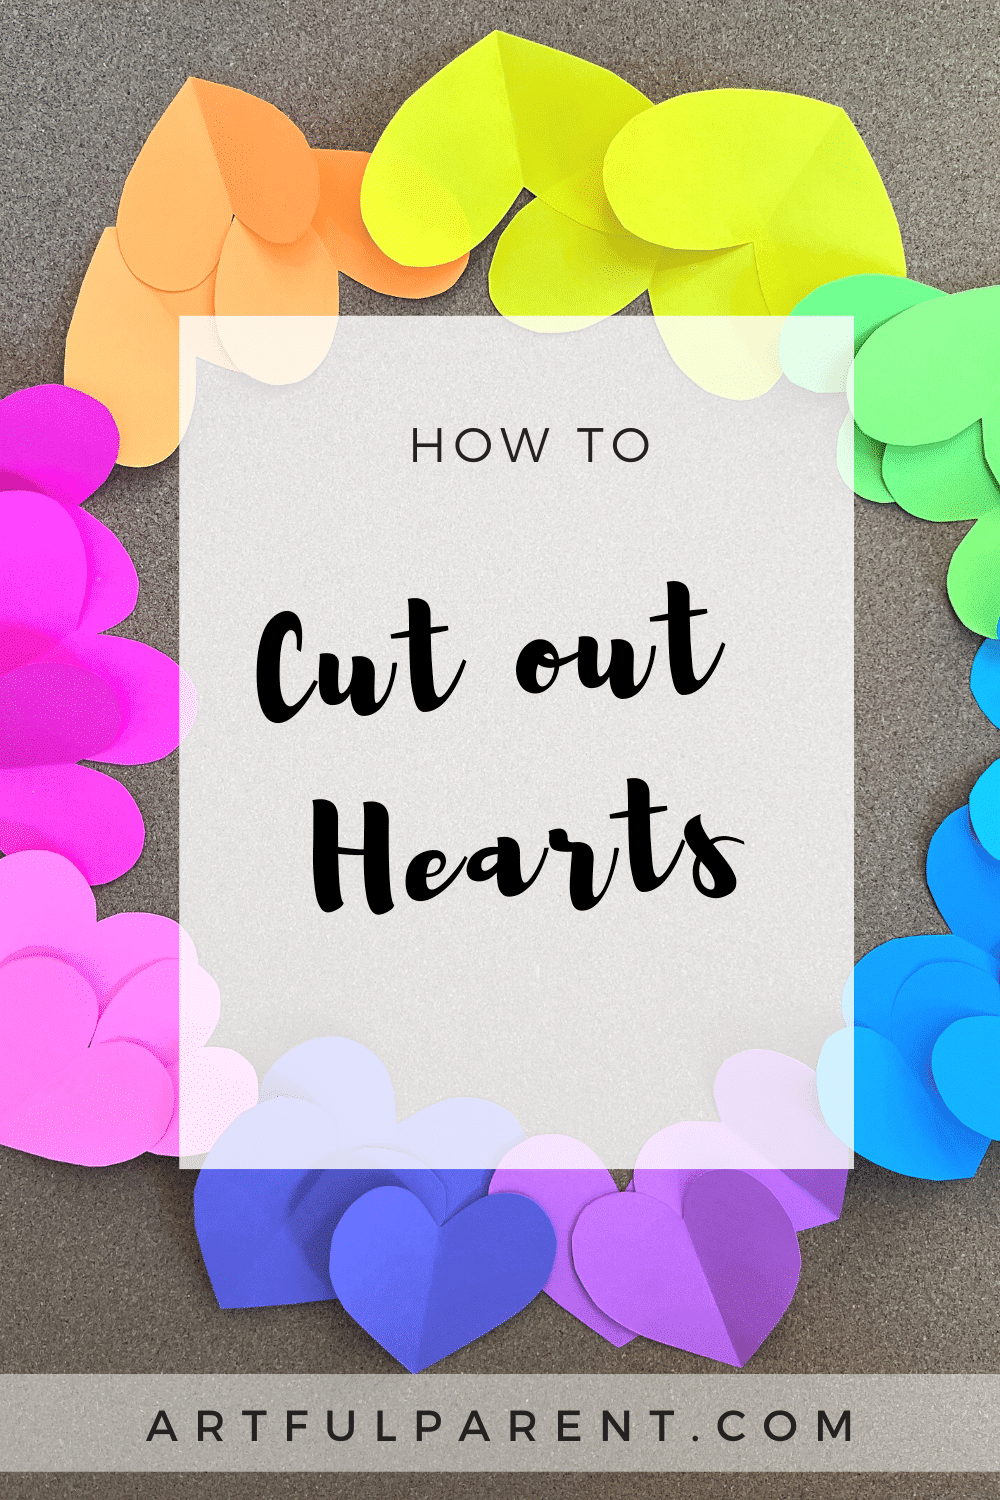 How to Cut Out Hearts from Paper